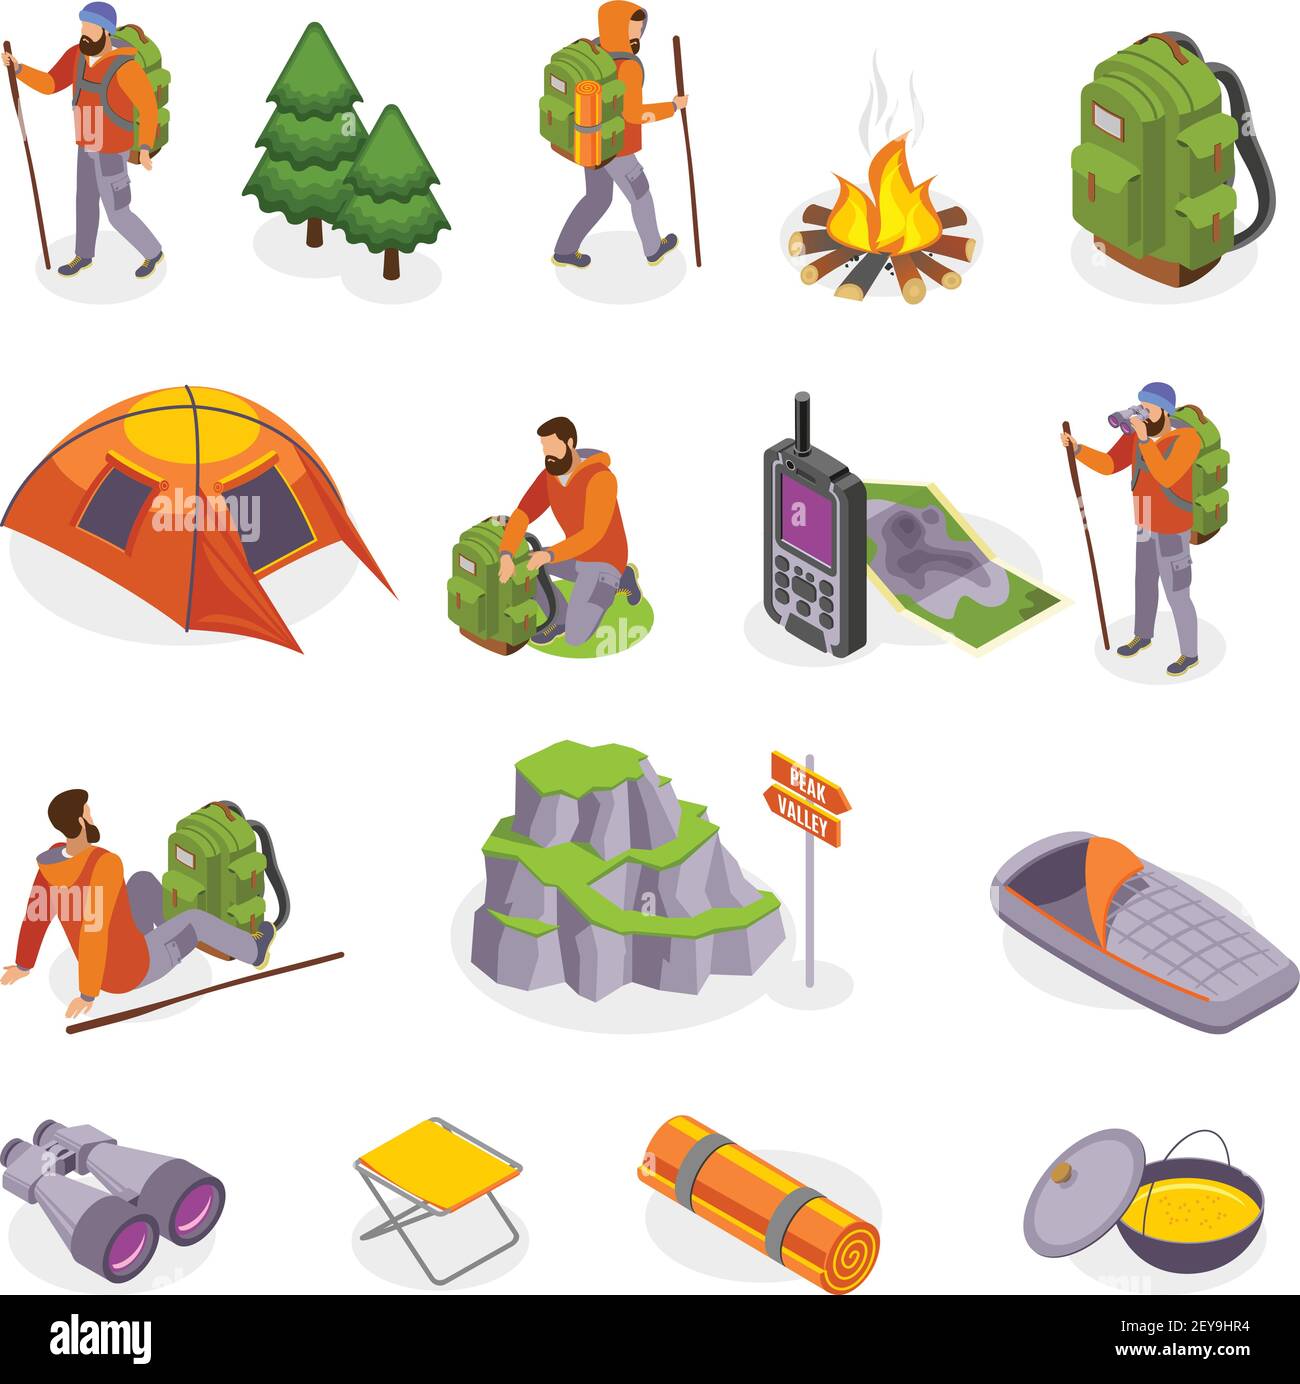 https://c8.alamy.com/comp/2EY9HR4/hiking-isometric-icons-collection-with-isolated-images-of-camping-gear-items-and-human-characters-of-tourists-vector-illustration-2EY9HR4.jpg